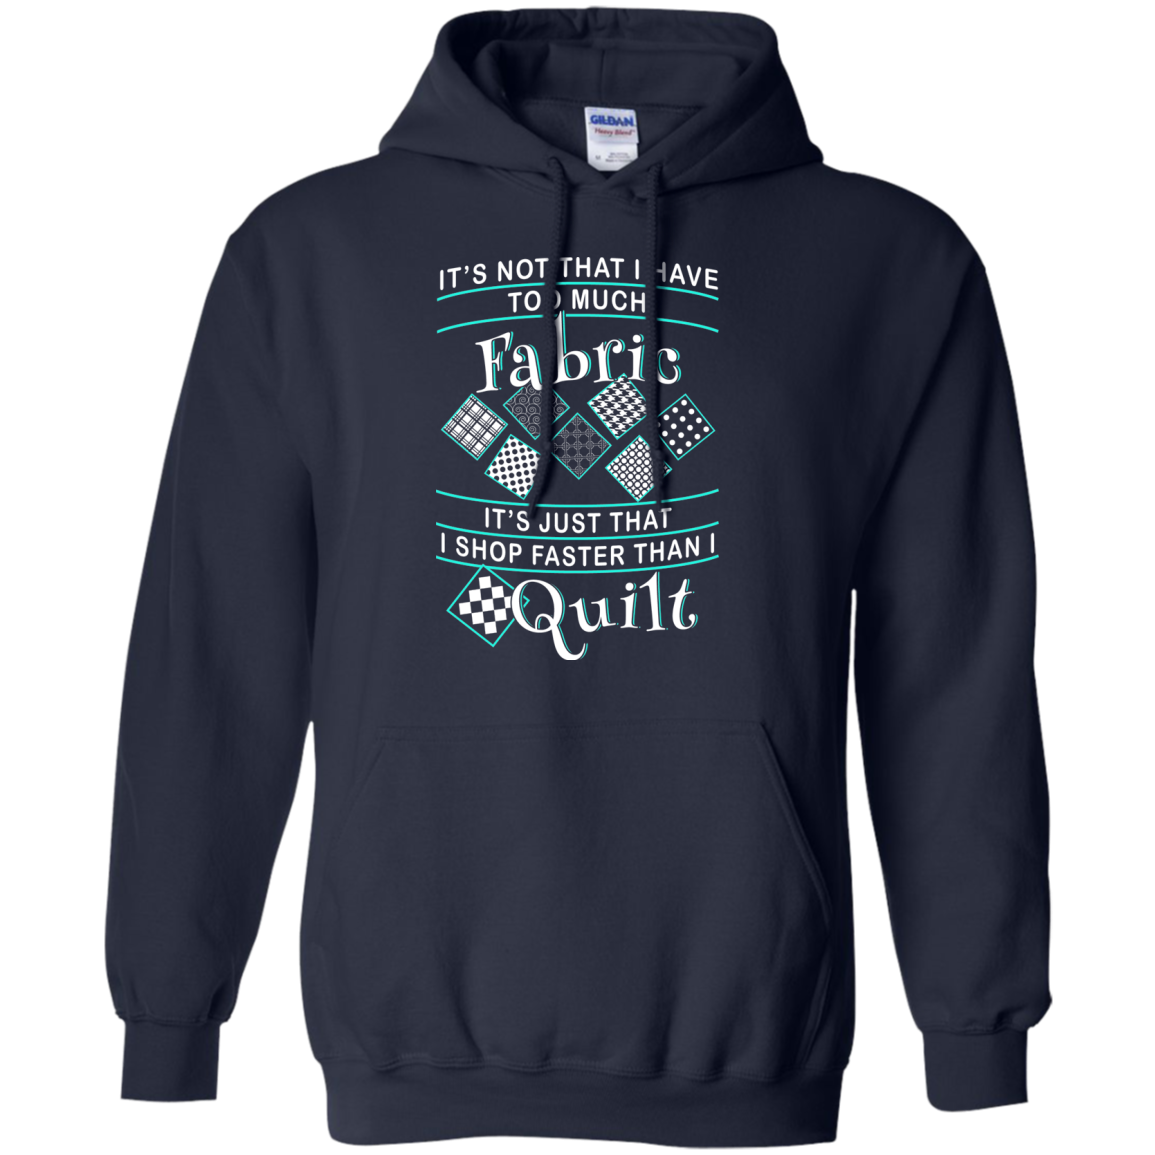 I Shop Faster than I Quilt Pullover Hoodies - Crafter4Life - 3